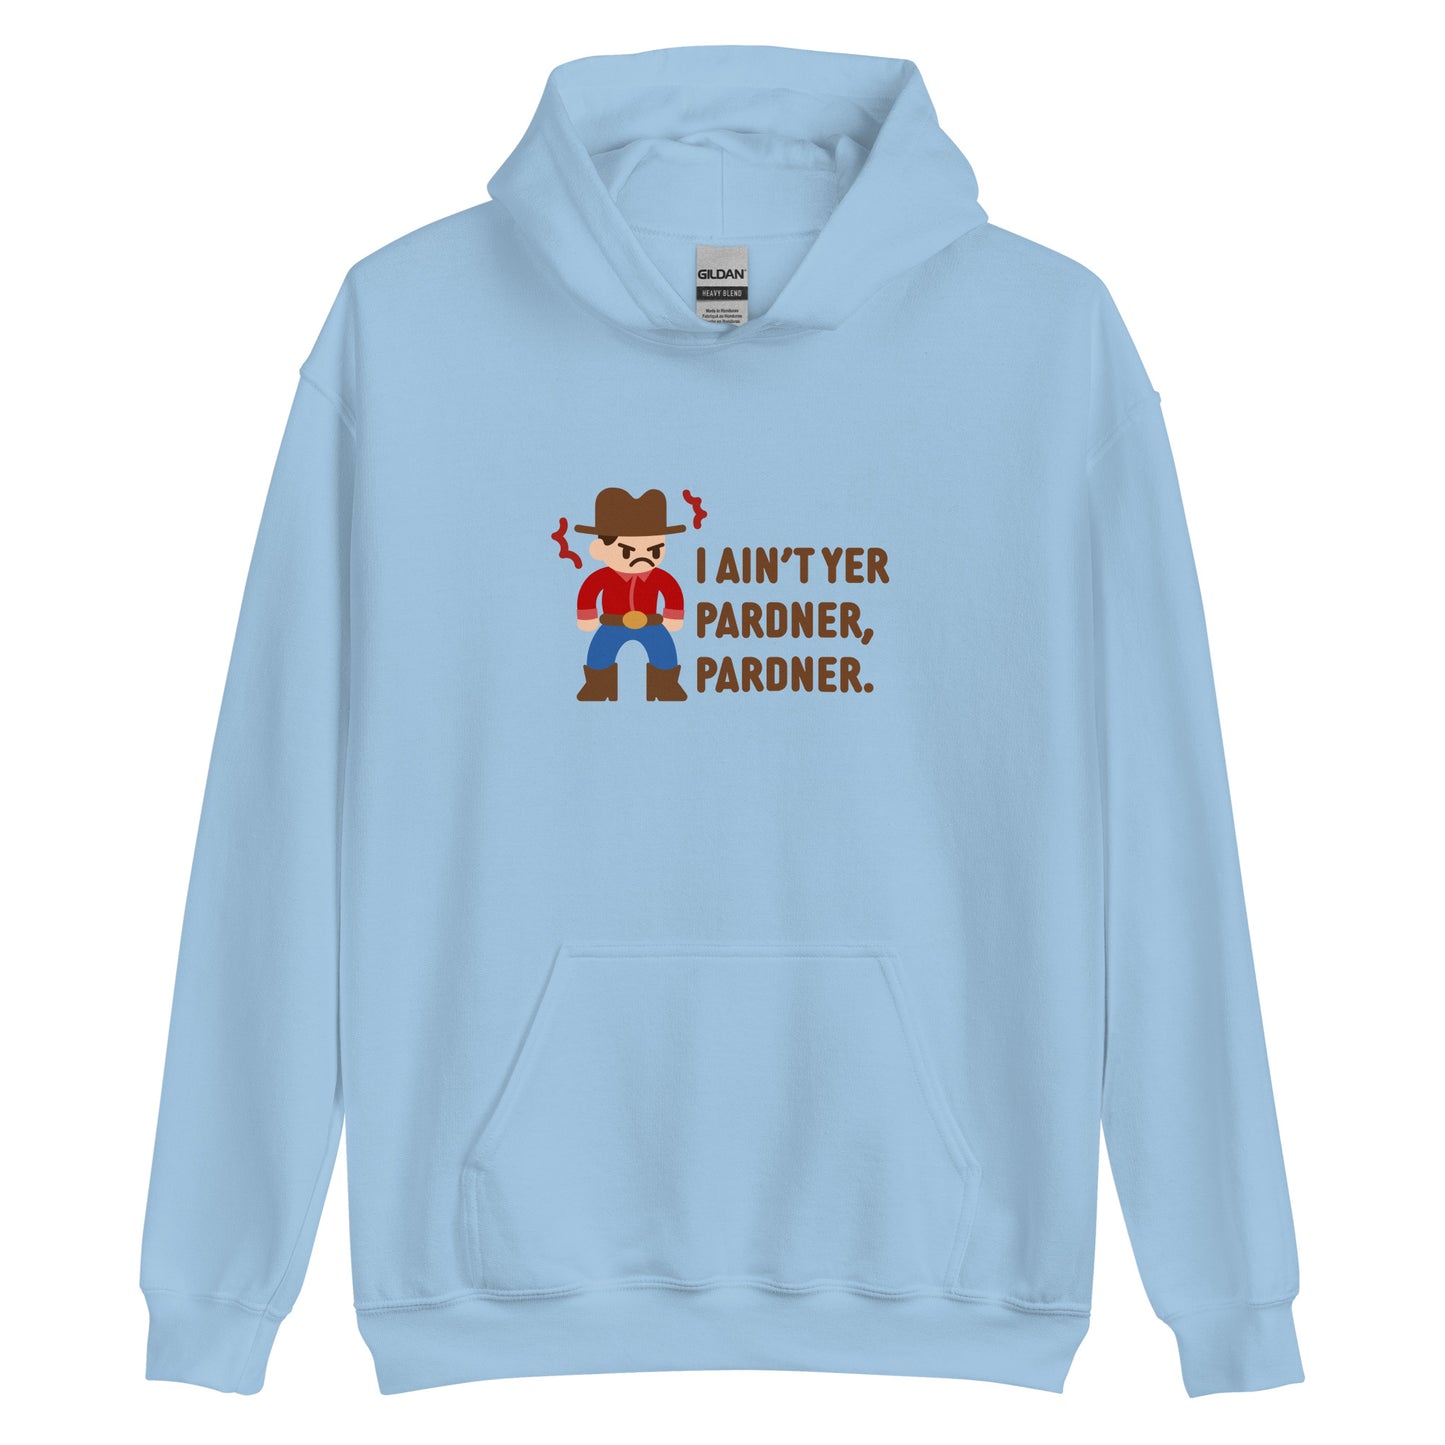 A light blue hooded sweatshirt featuring an illustration of a grumpy cowboy wearing a red shirt. Text beneath the cowboy reads "I ain't yer pardner, pardner."